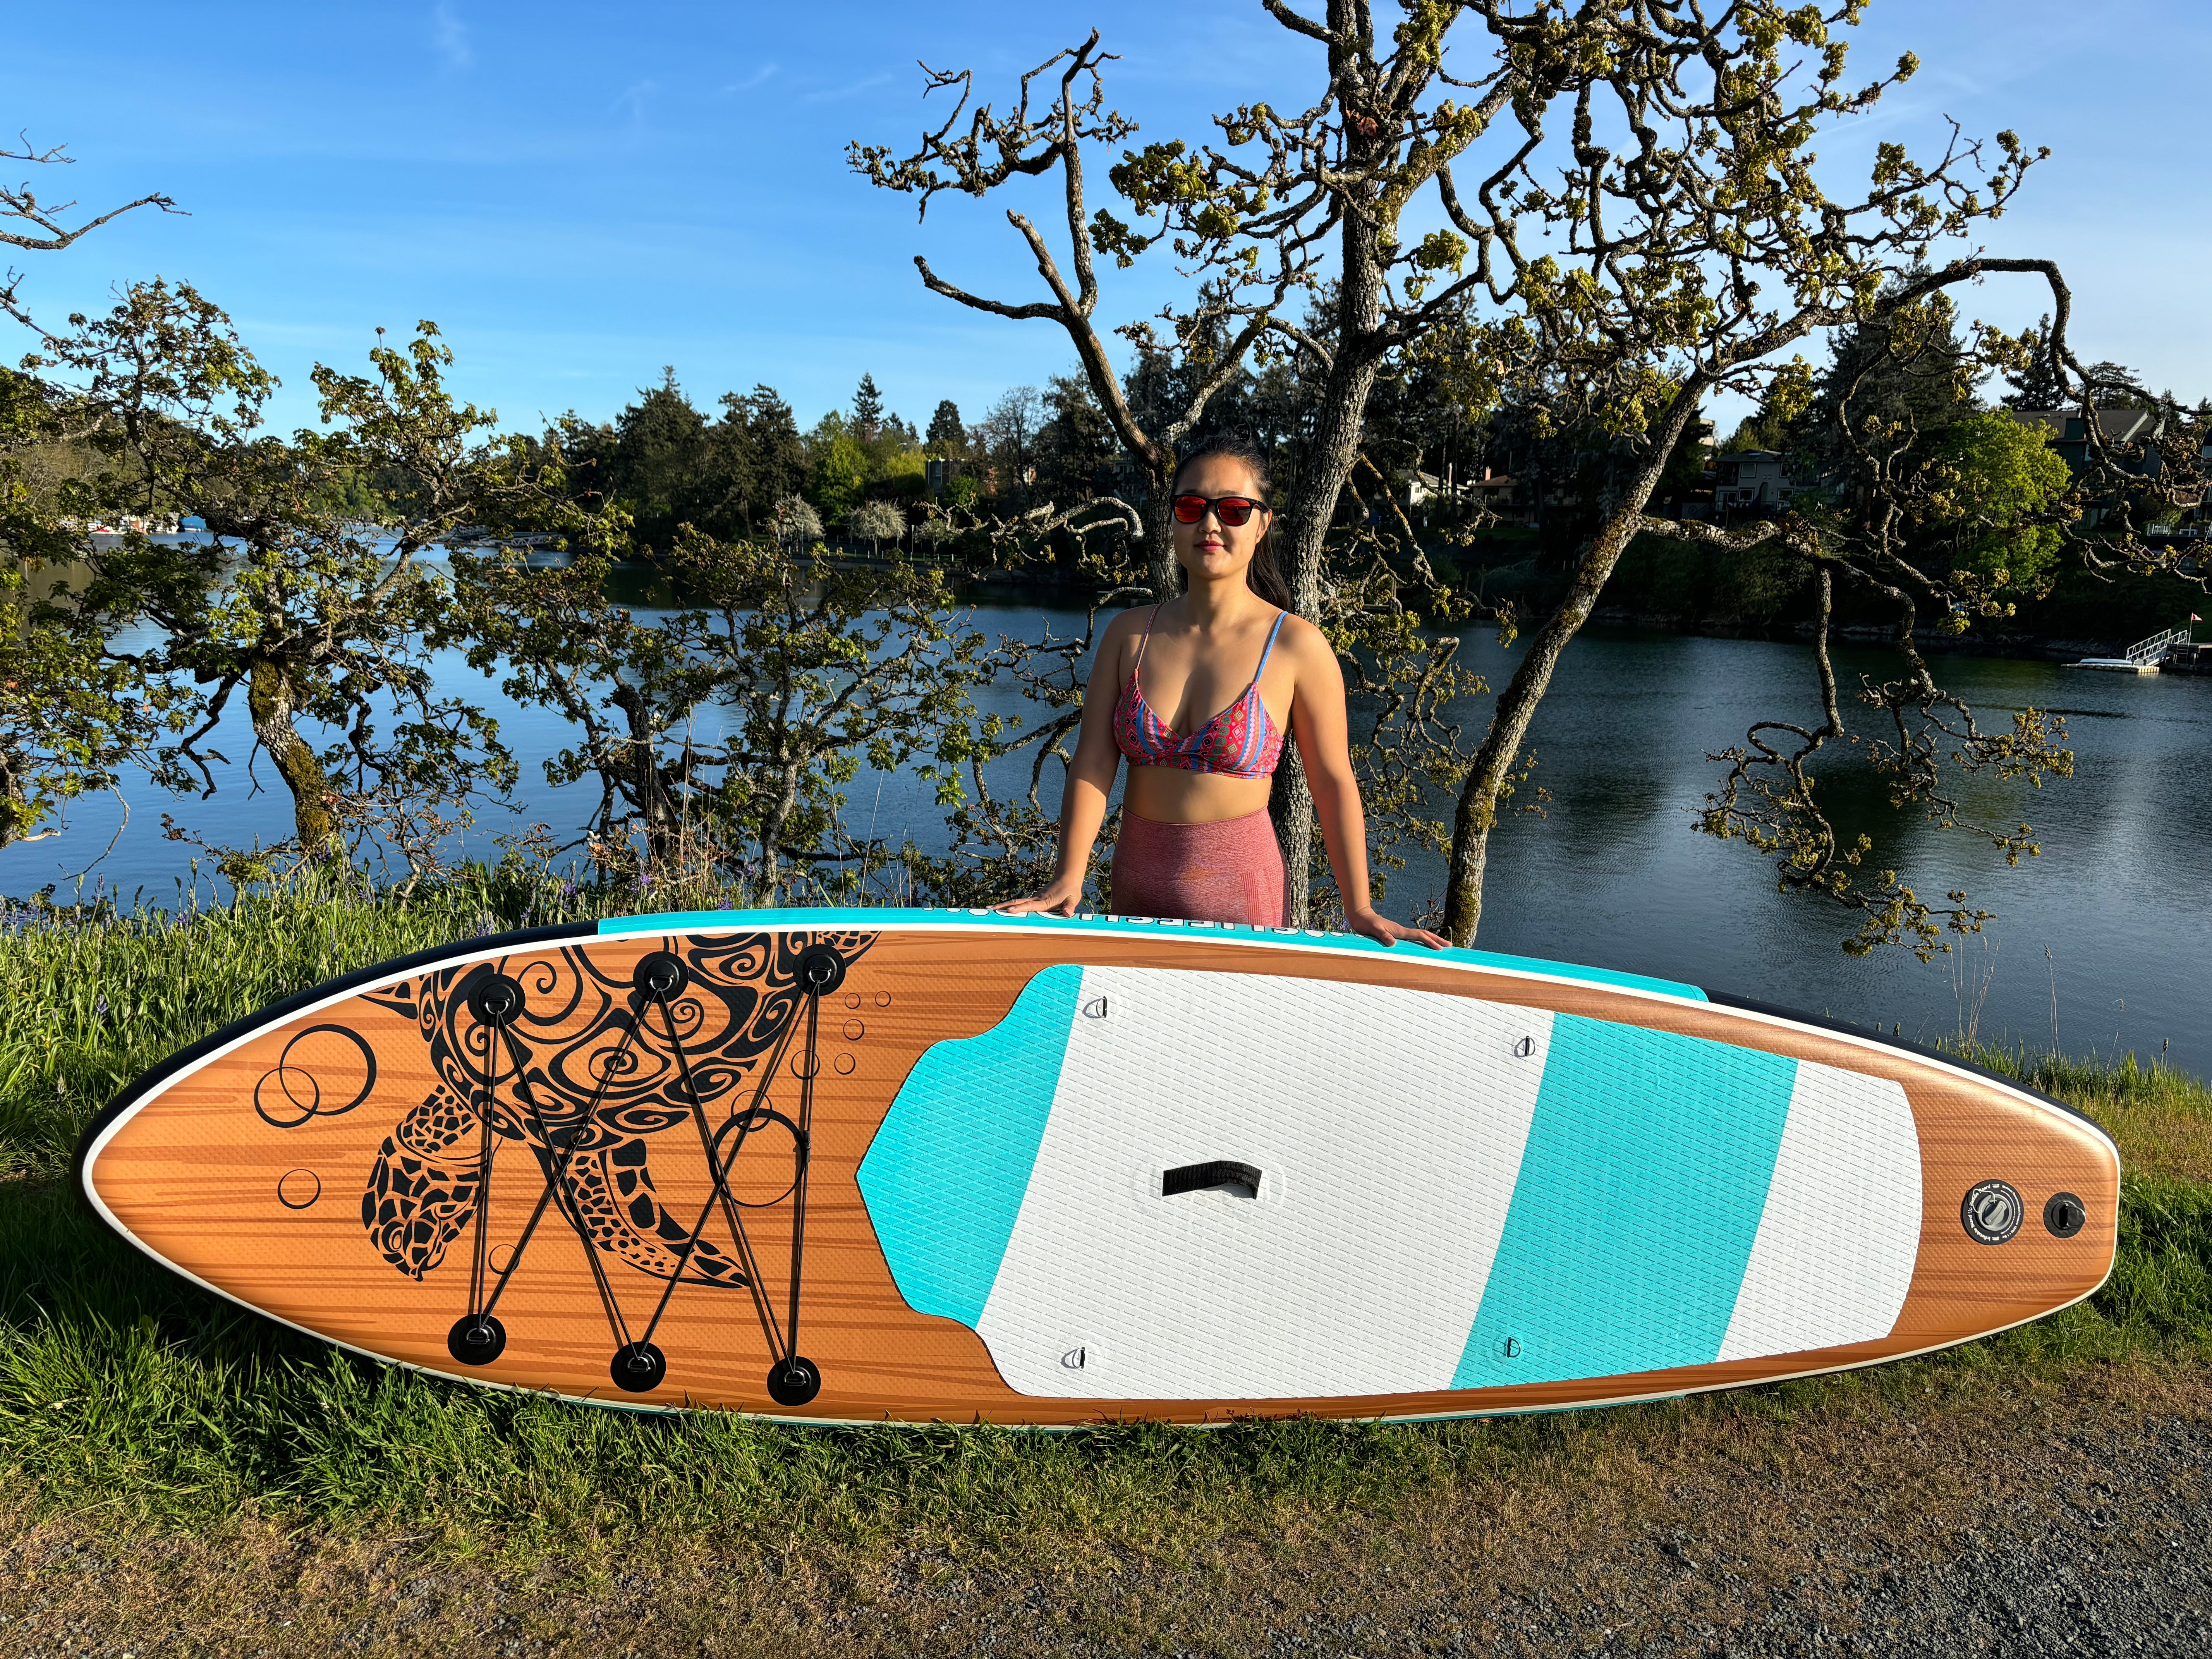 Slifeshop Stand Up Paddle Board SUP Inflatable Wood Turtle Teal